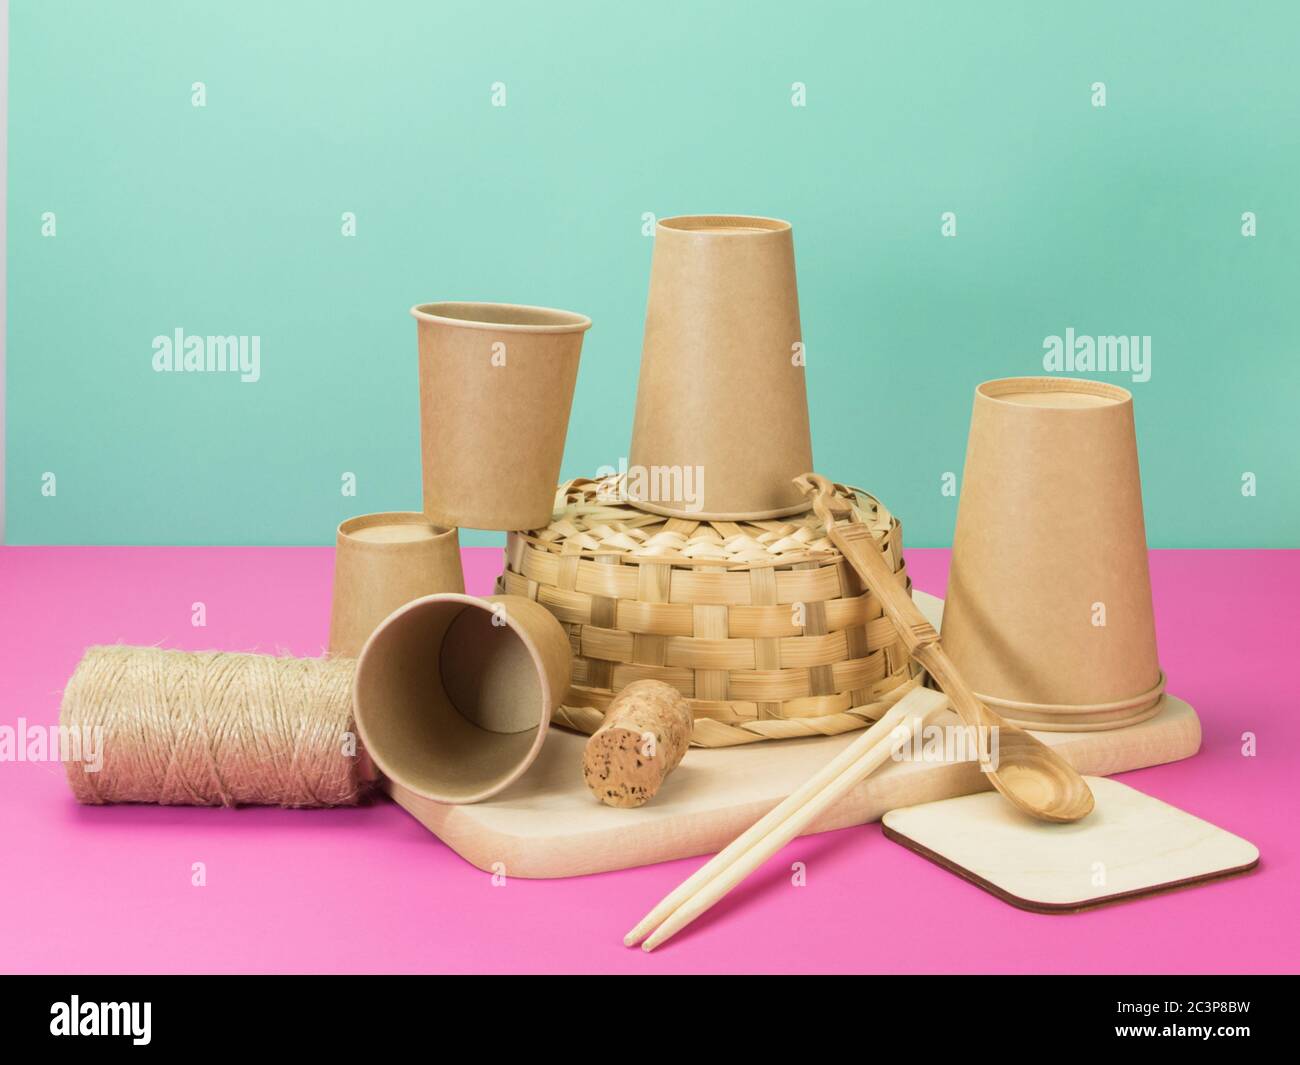 Household items made from environmentally friendly materials. Stock Photo